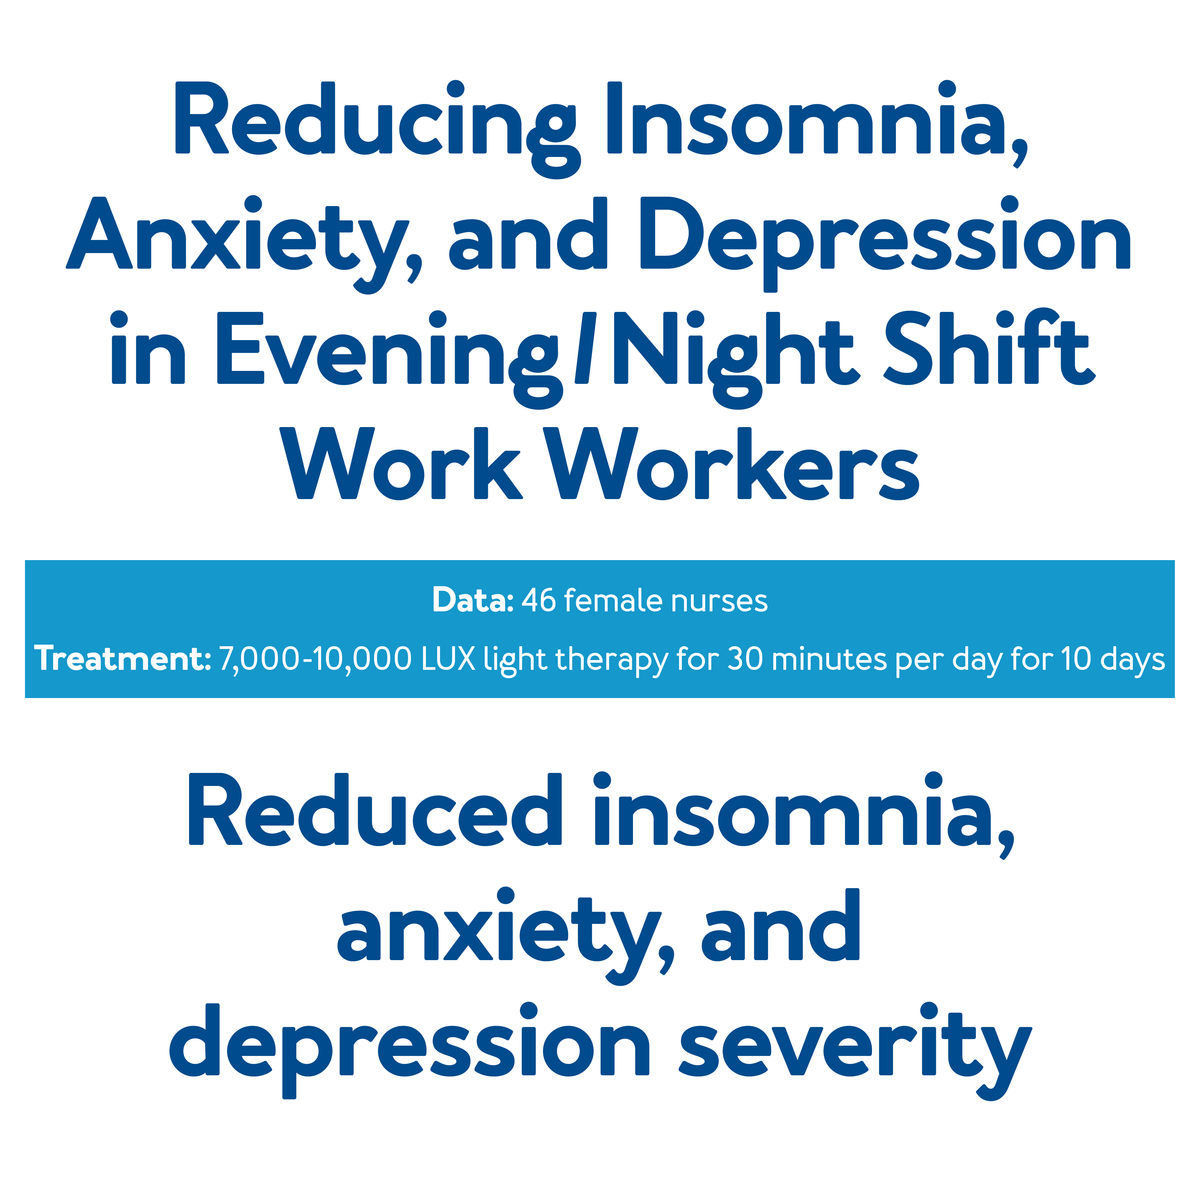 Reducing Insomnia, Anxiety, and Depression in Evening/Night, further details are provided below.